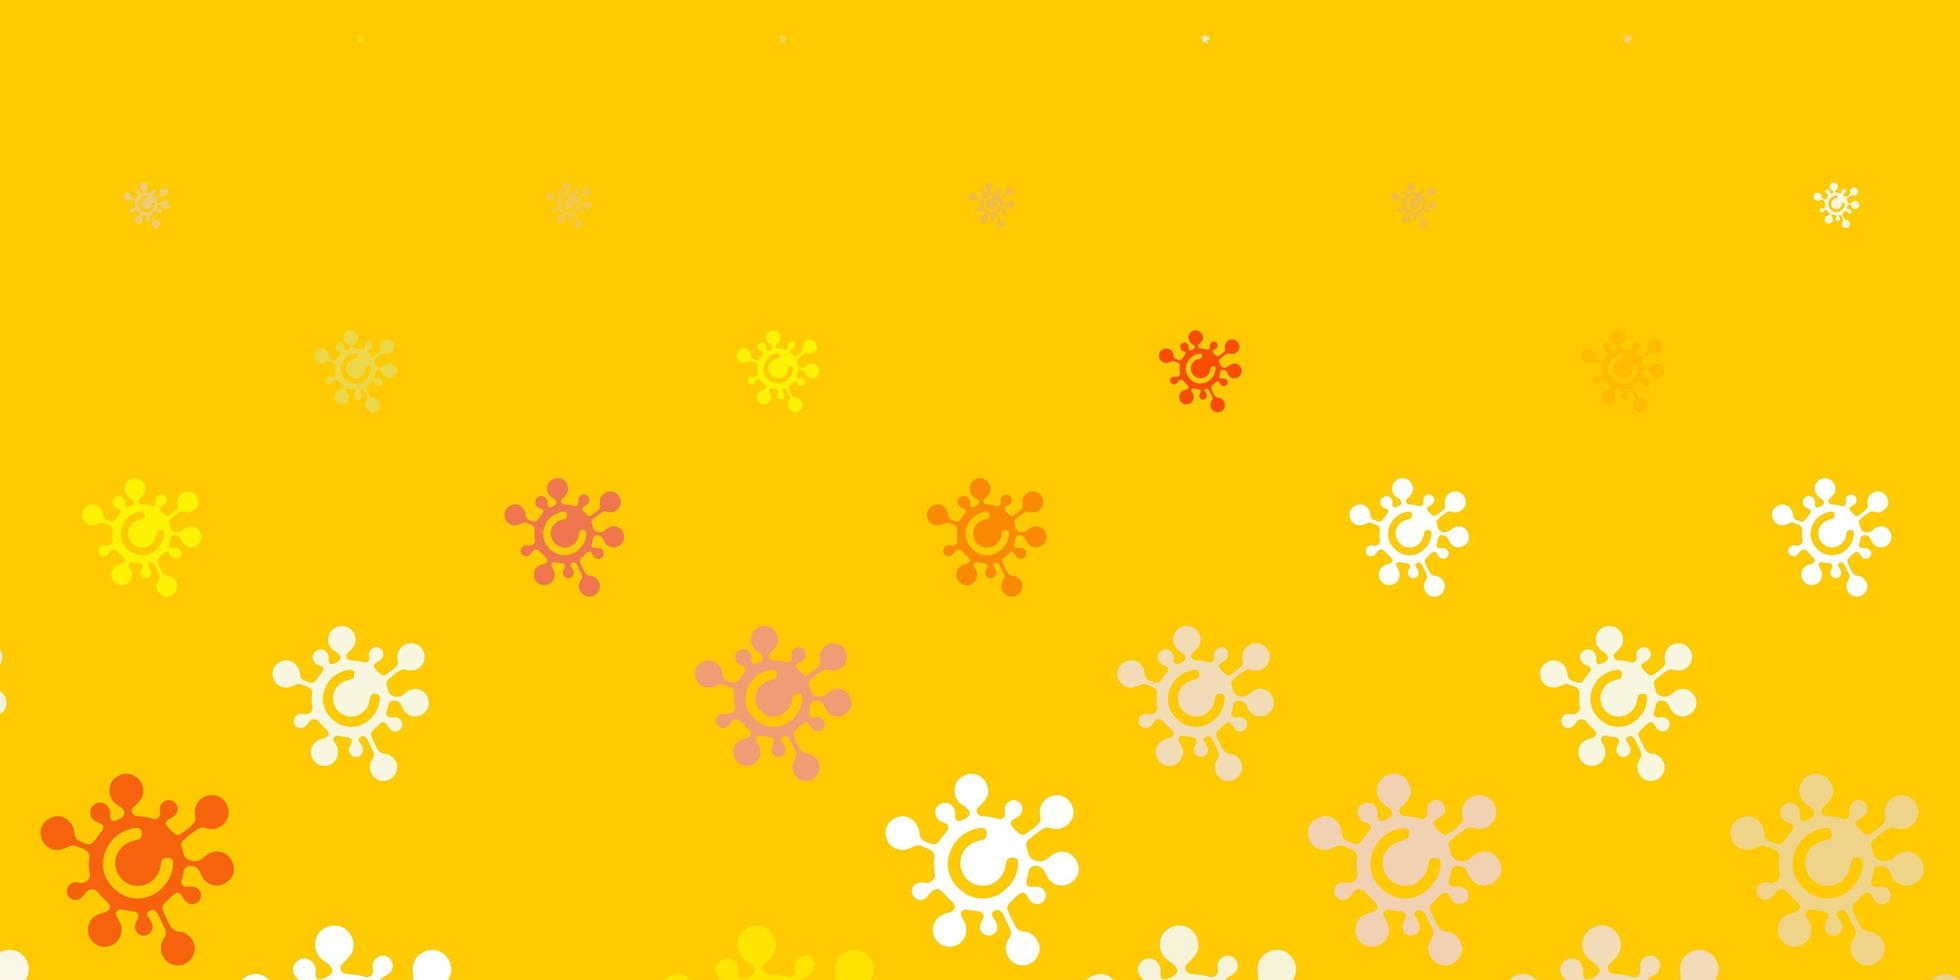 Light Yellow vector texture with disease symbols